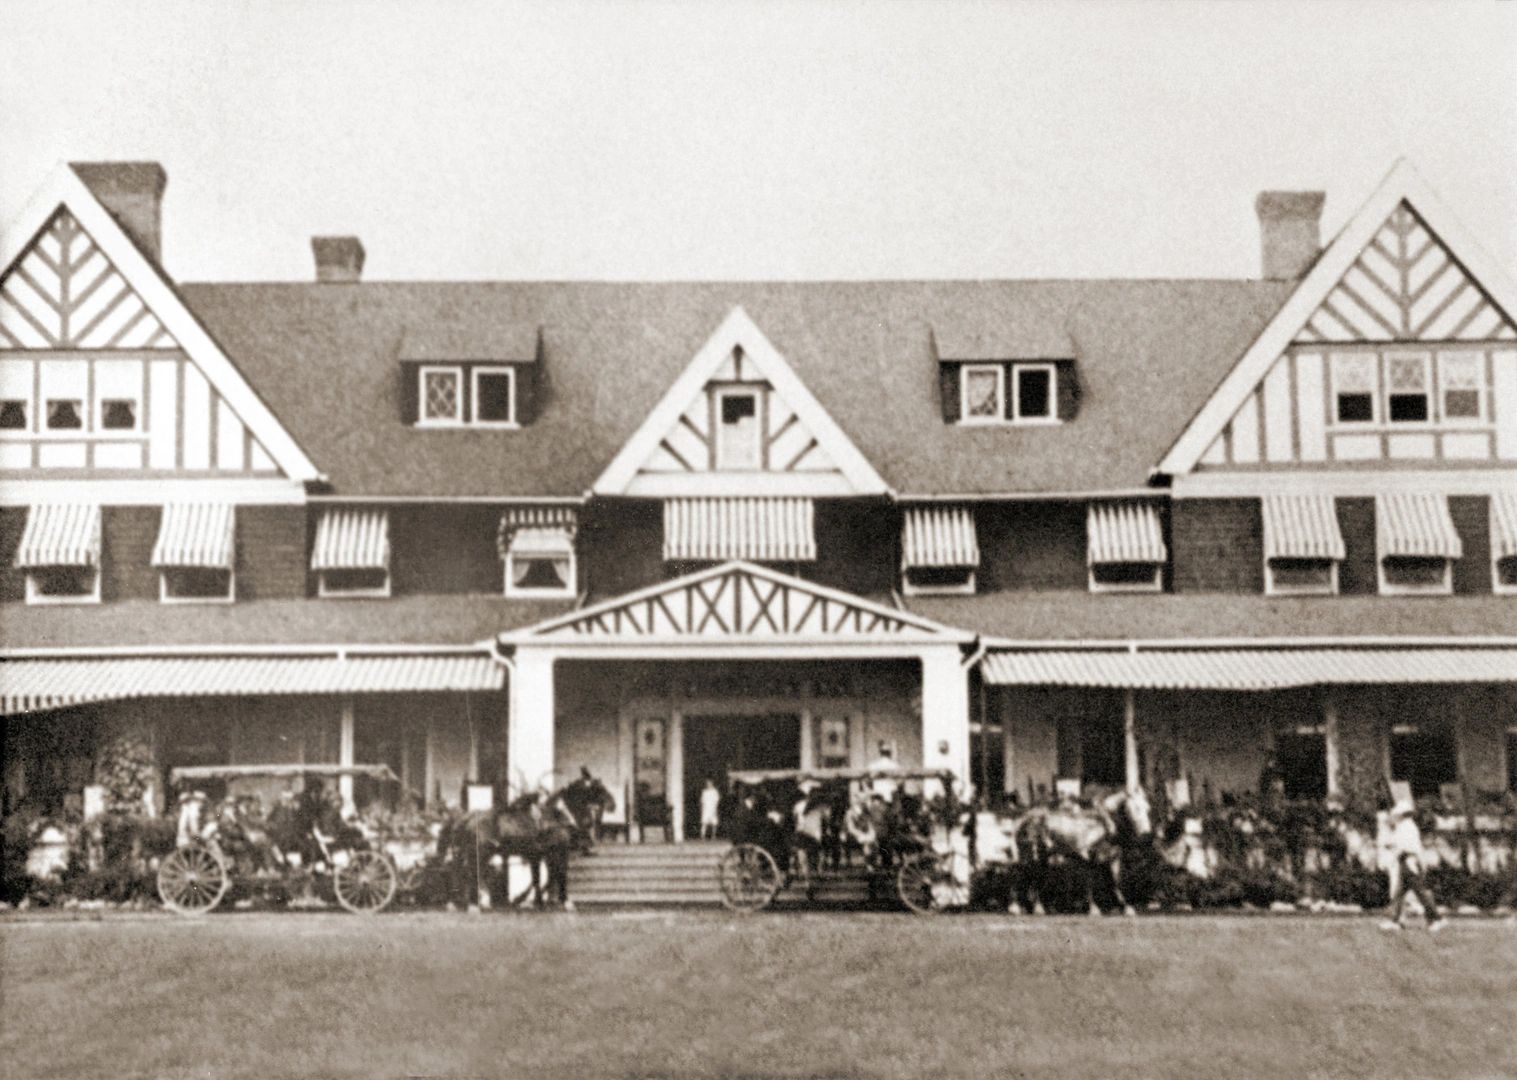 Oakmont Country Club founded in 1903